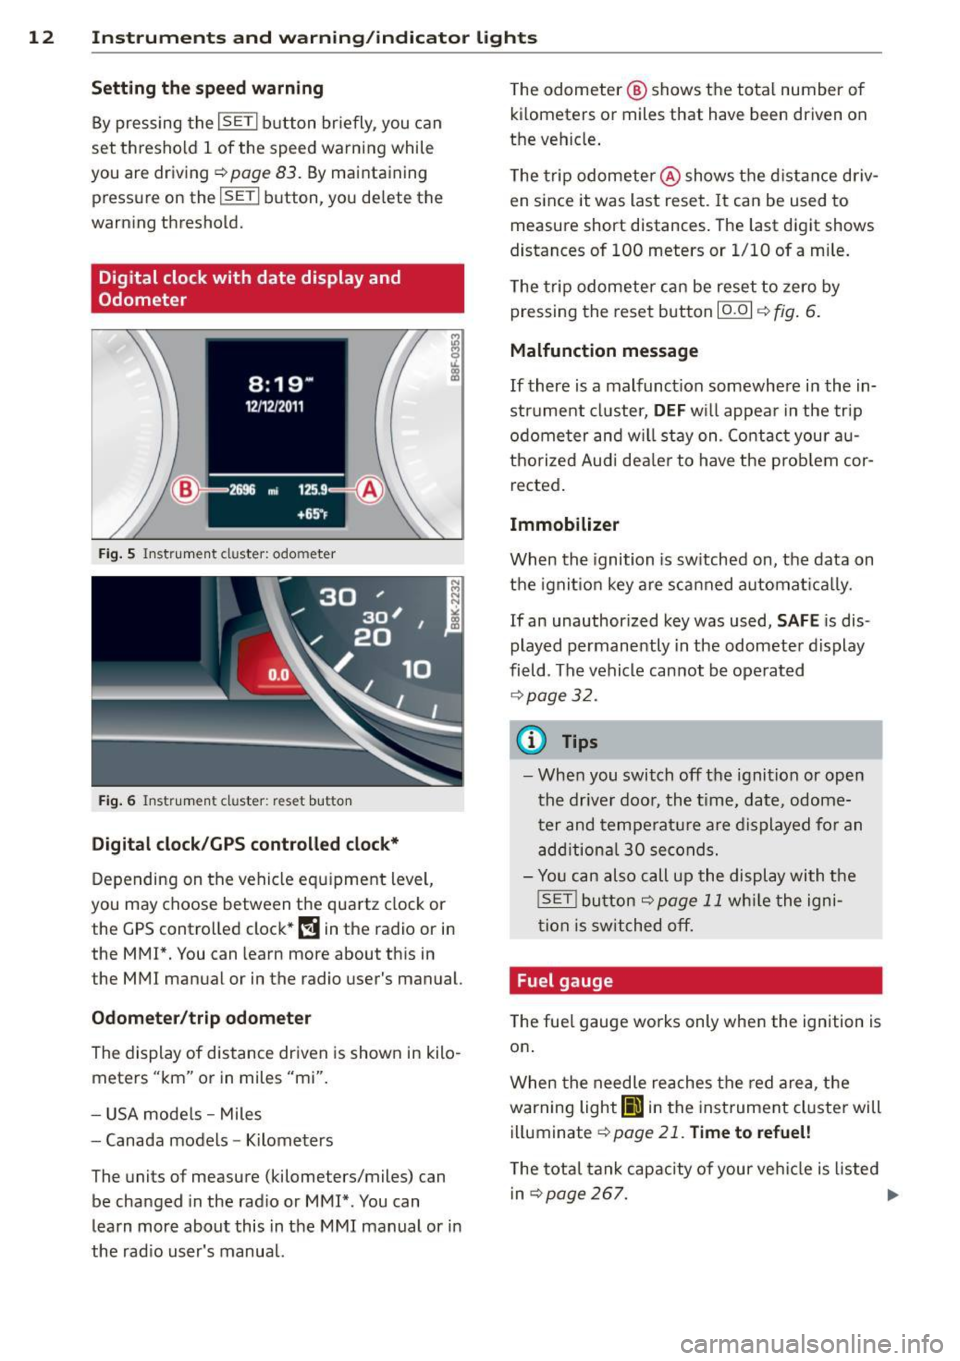 AUDI A5 CABRIOLET 2013  Owners Manual 12  Instrum ents  a nd warning /indic ato r  li ghts 
Se tting  th e speed warning 
By pressing  the I SETI button  br iefly,  you  can 
set  threshold  1  of the  speed  warning  while 
you  are  dri